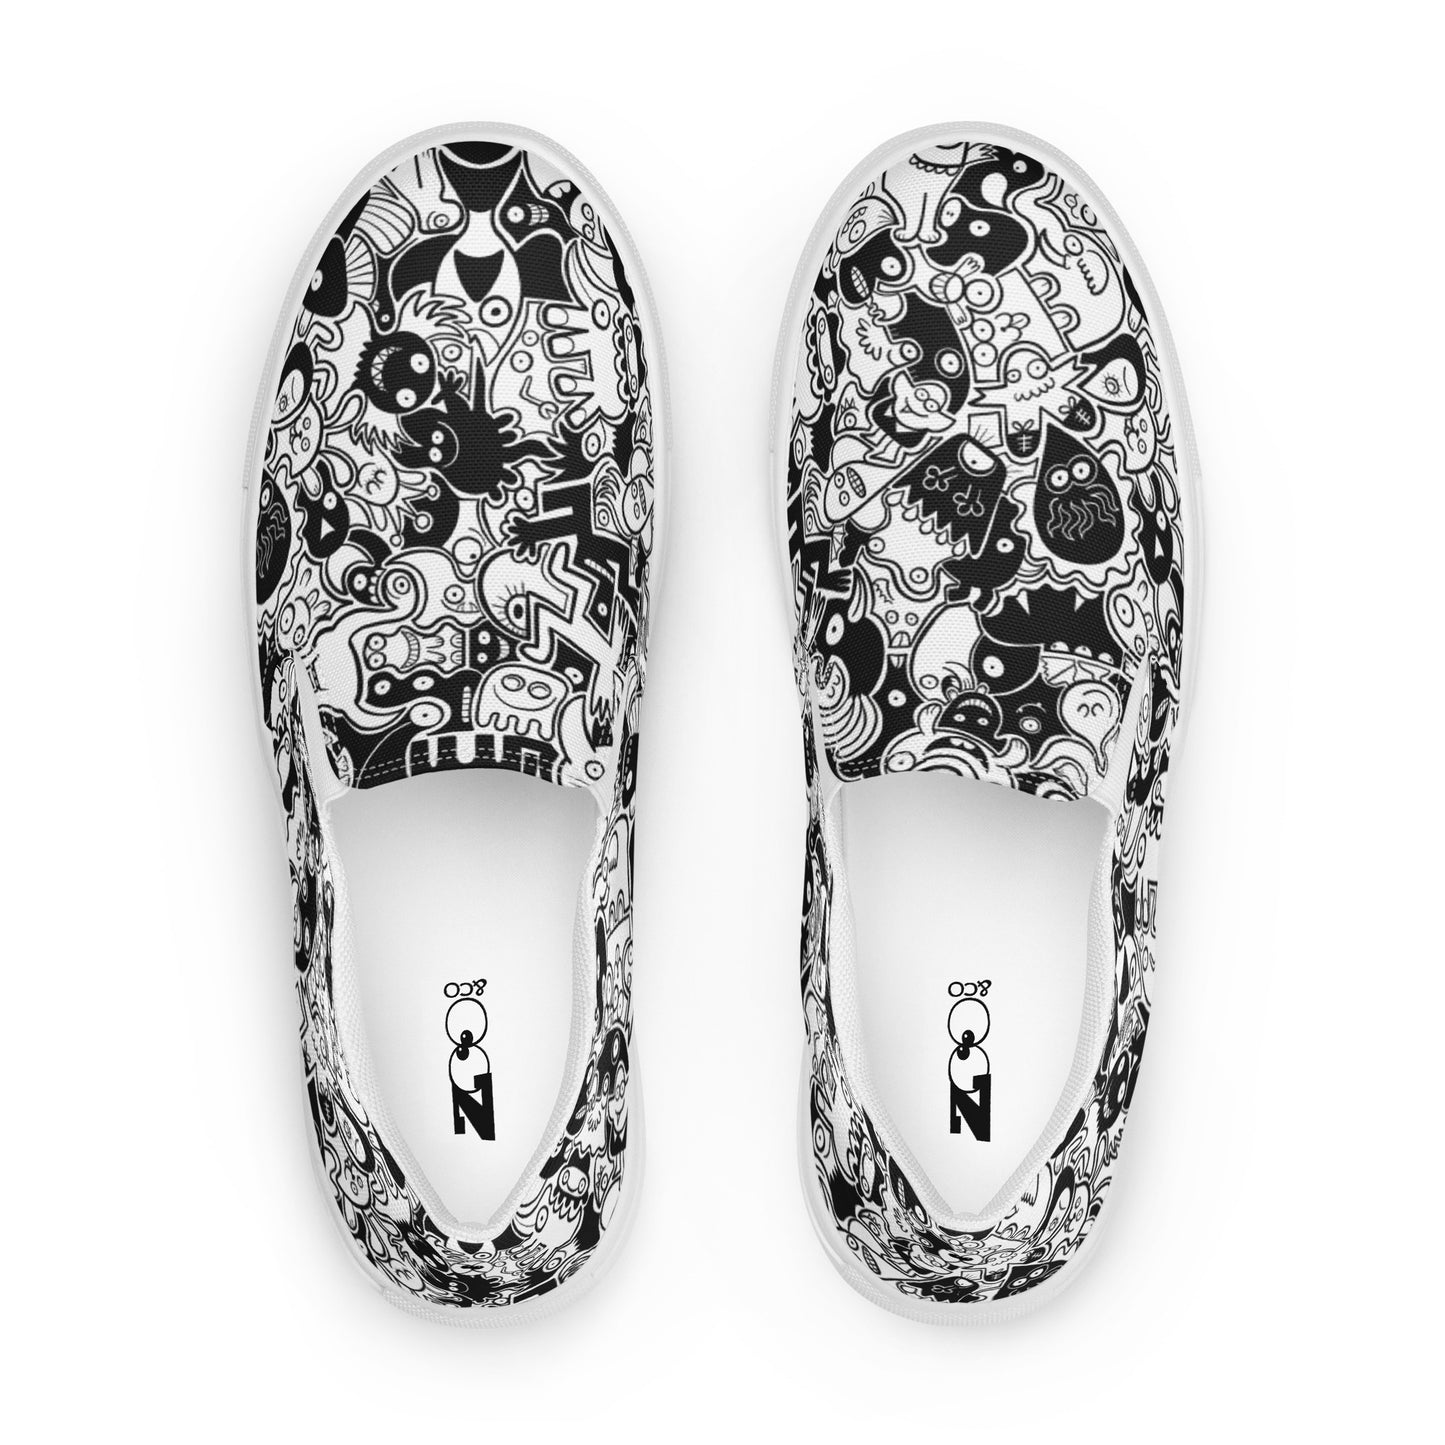 Joyful crowd of black and white doodle creatures Women’s slip-on canvas shoes. Top view